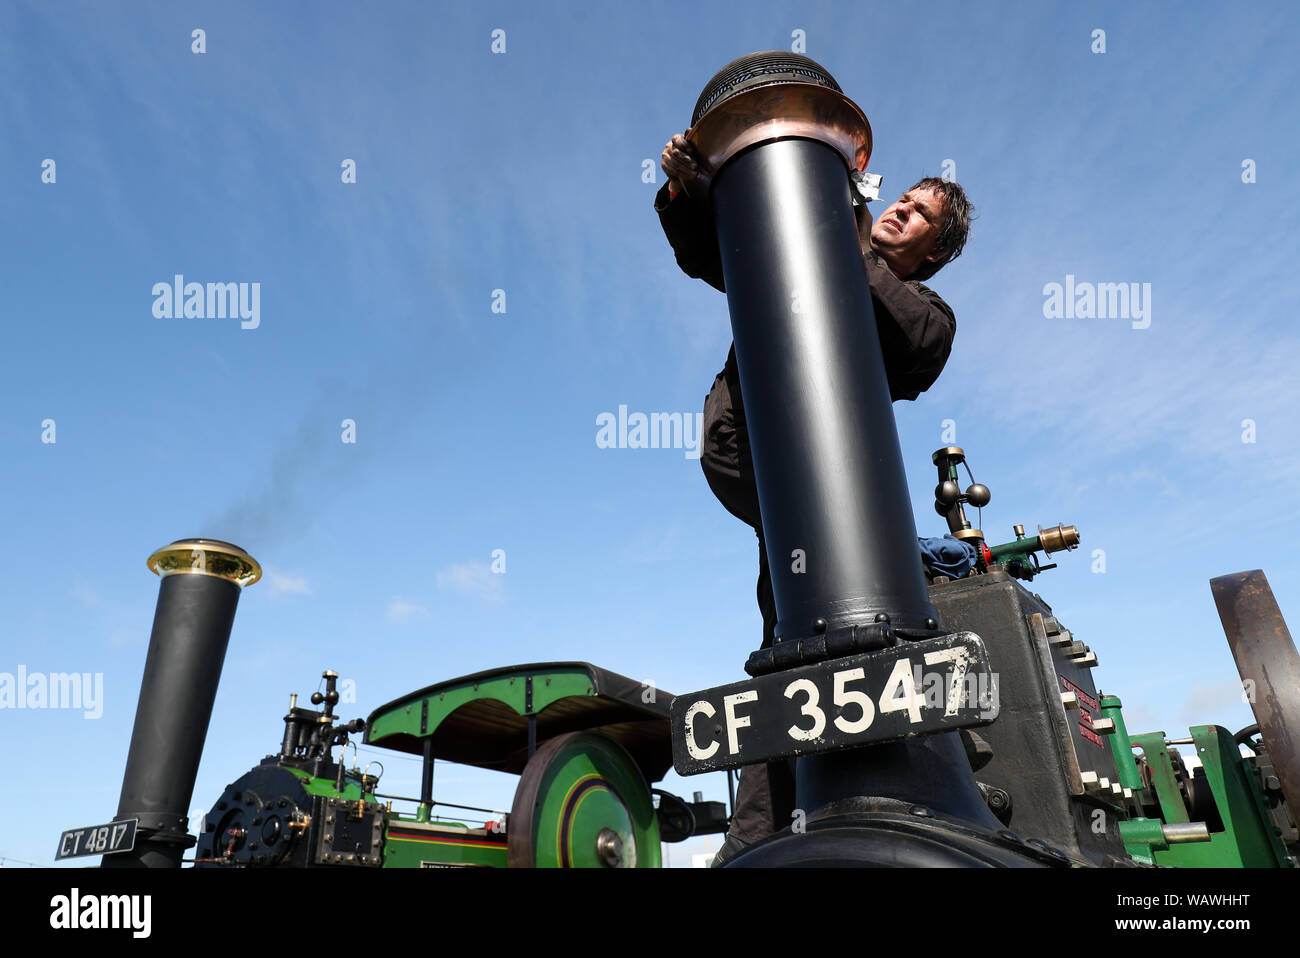 A person polishes the chimney on their Clayton & Shuttleworth General Purpose Engine during day one of the 2019 Great Dorset Steam Fair. The fair is a gathering of hundreds of period steam traction engines and heavy mechanical equipment from all eras come to showcase Great Britain's rich industrial, agricultural and leisure history, at the annual show taking place over the August Bank Holiday weekend from Thursday 22nd to Monday 26th August. Stock Photo